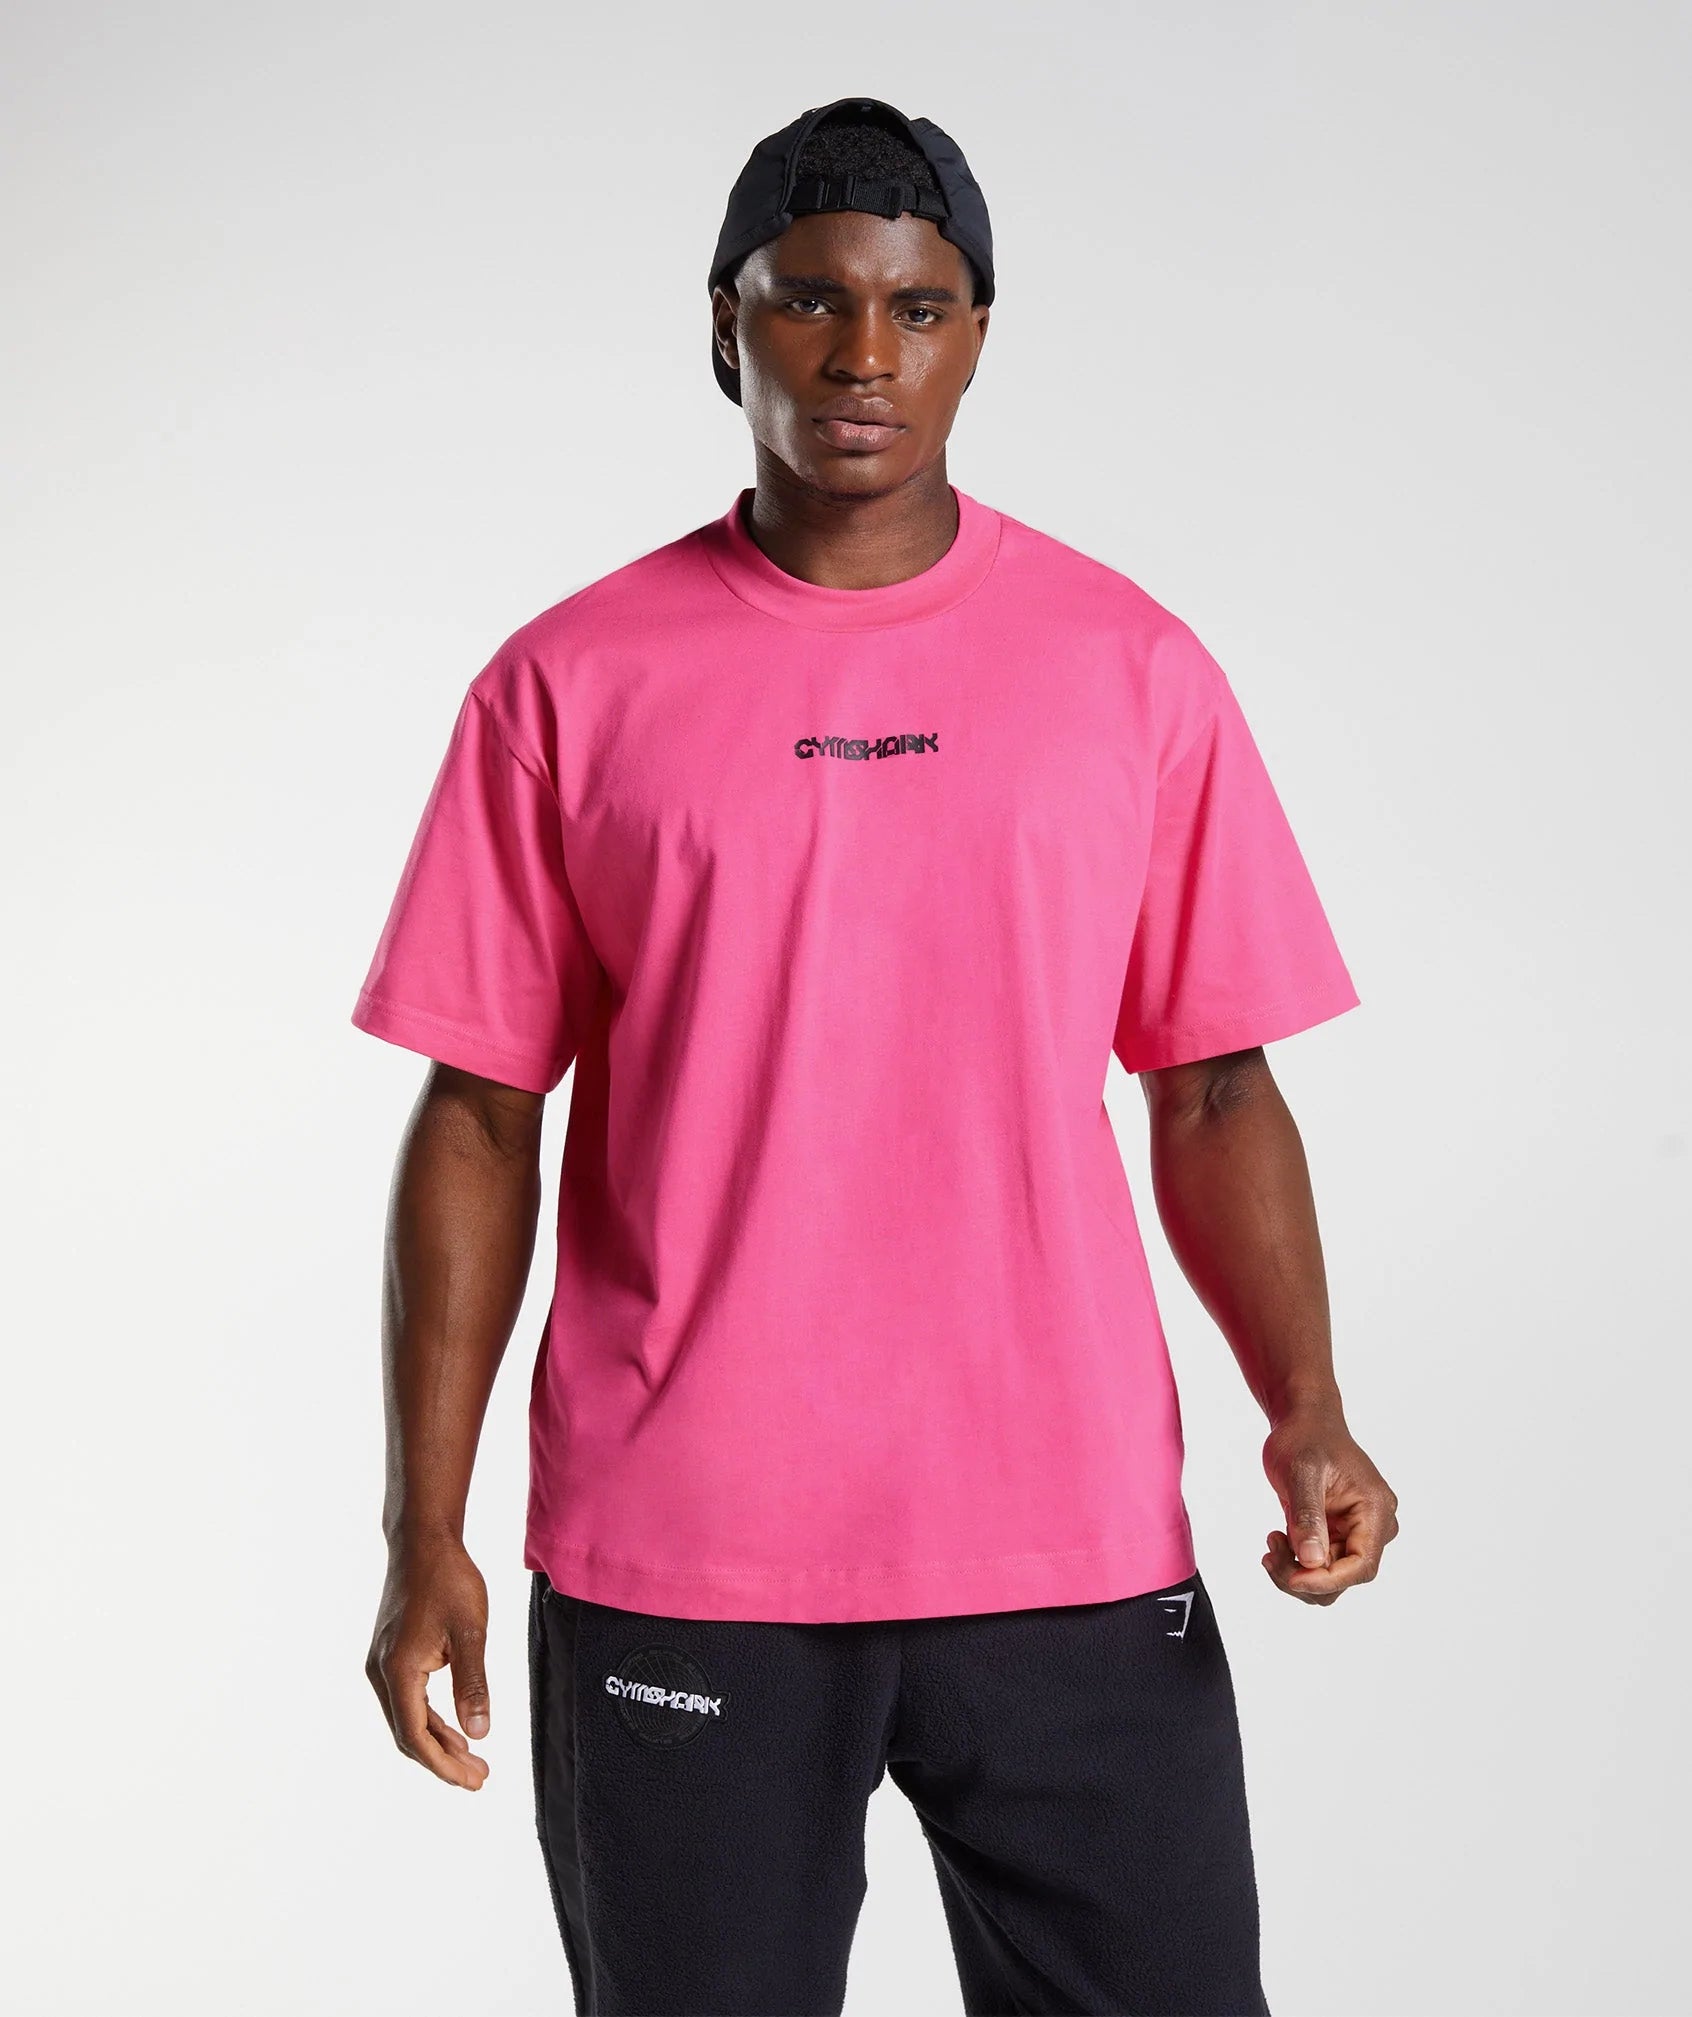 Vibes T-Shirt in Bright Fuchsia - view 2